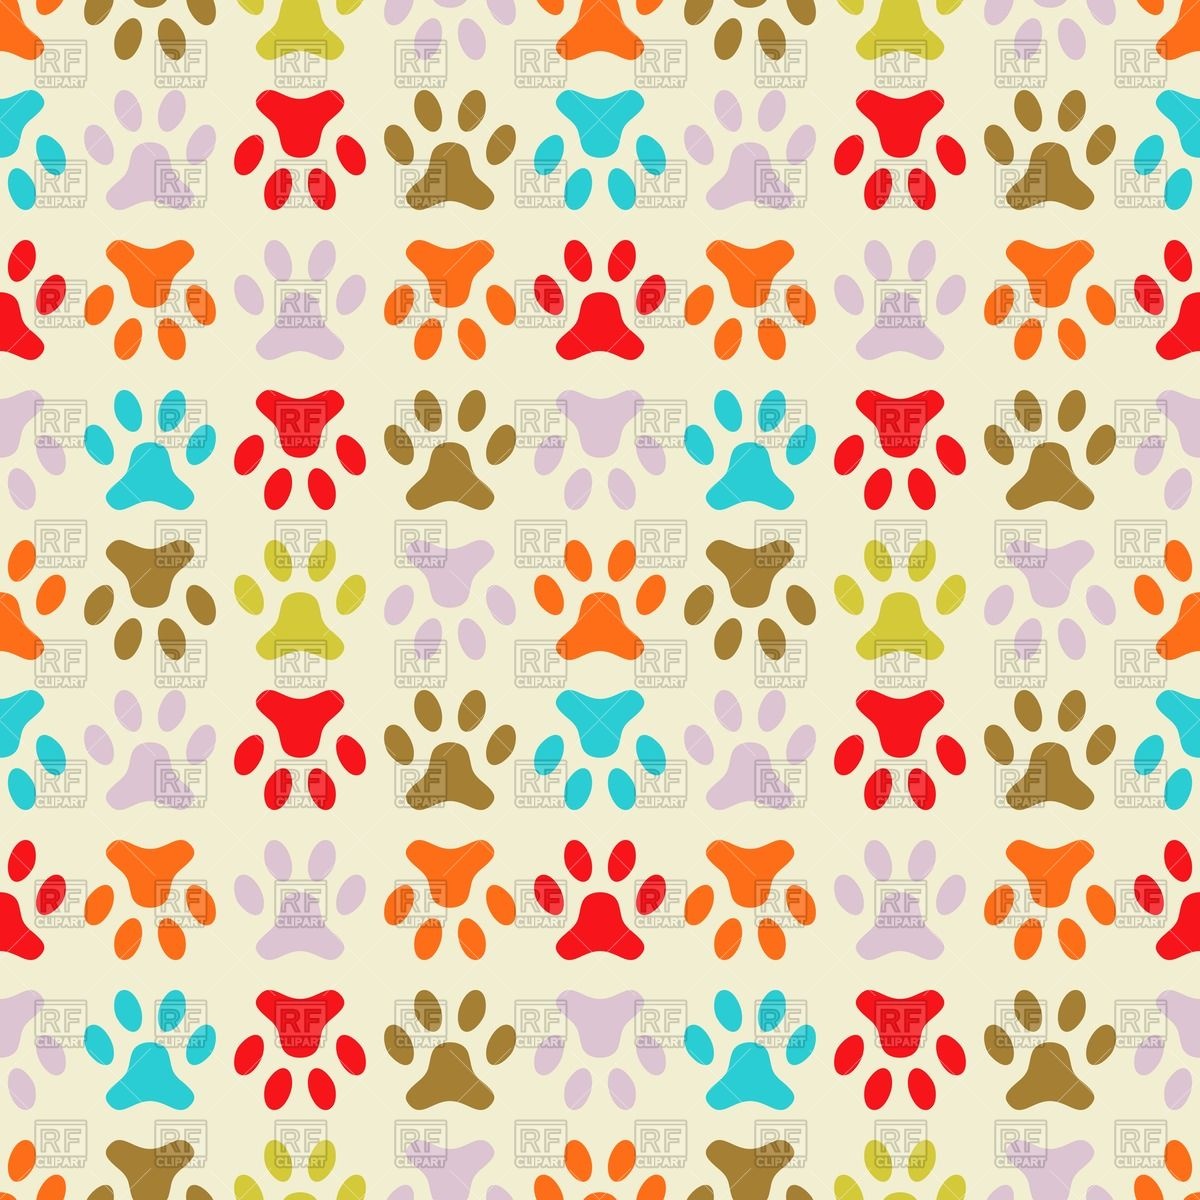 Colorful Wallpaper With Dog S Paw Prints Vector Image